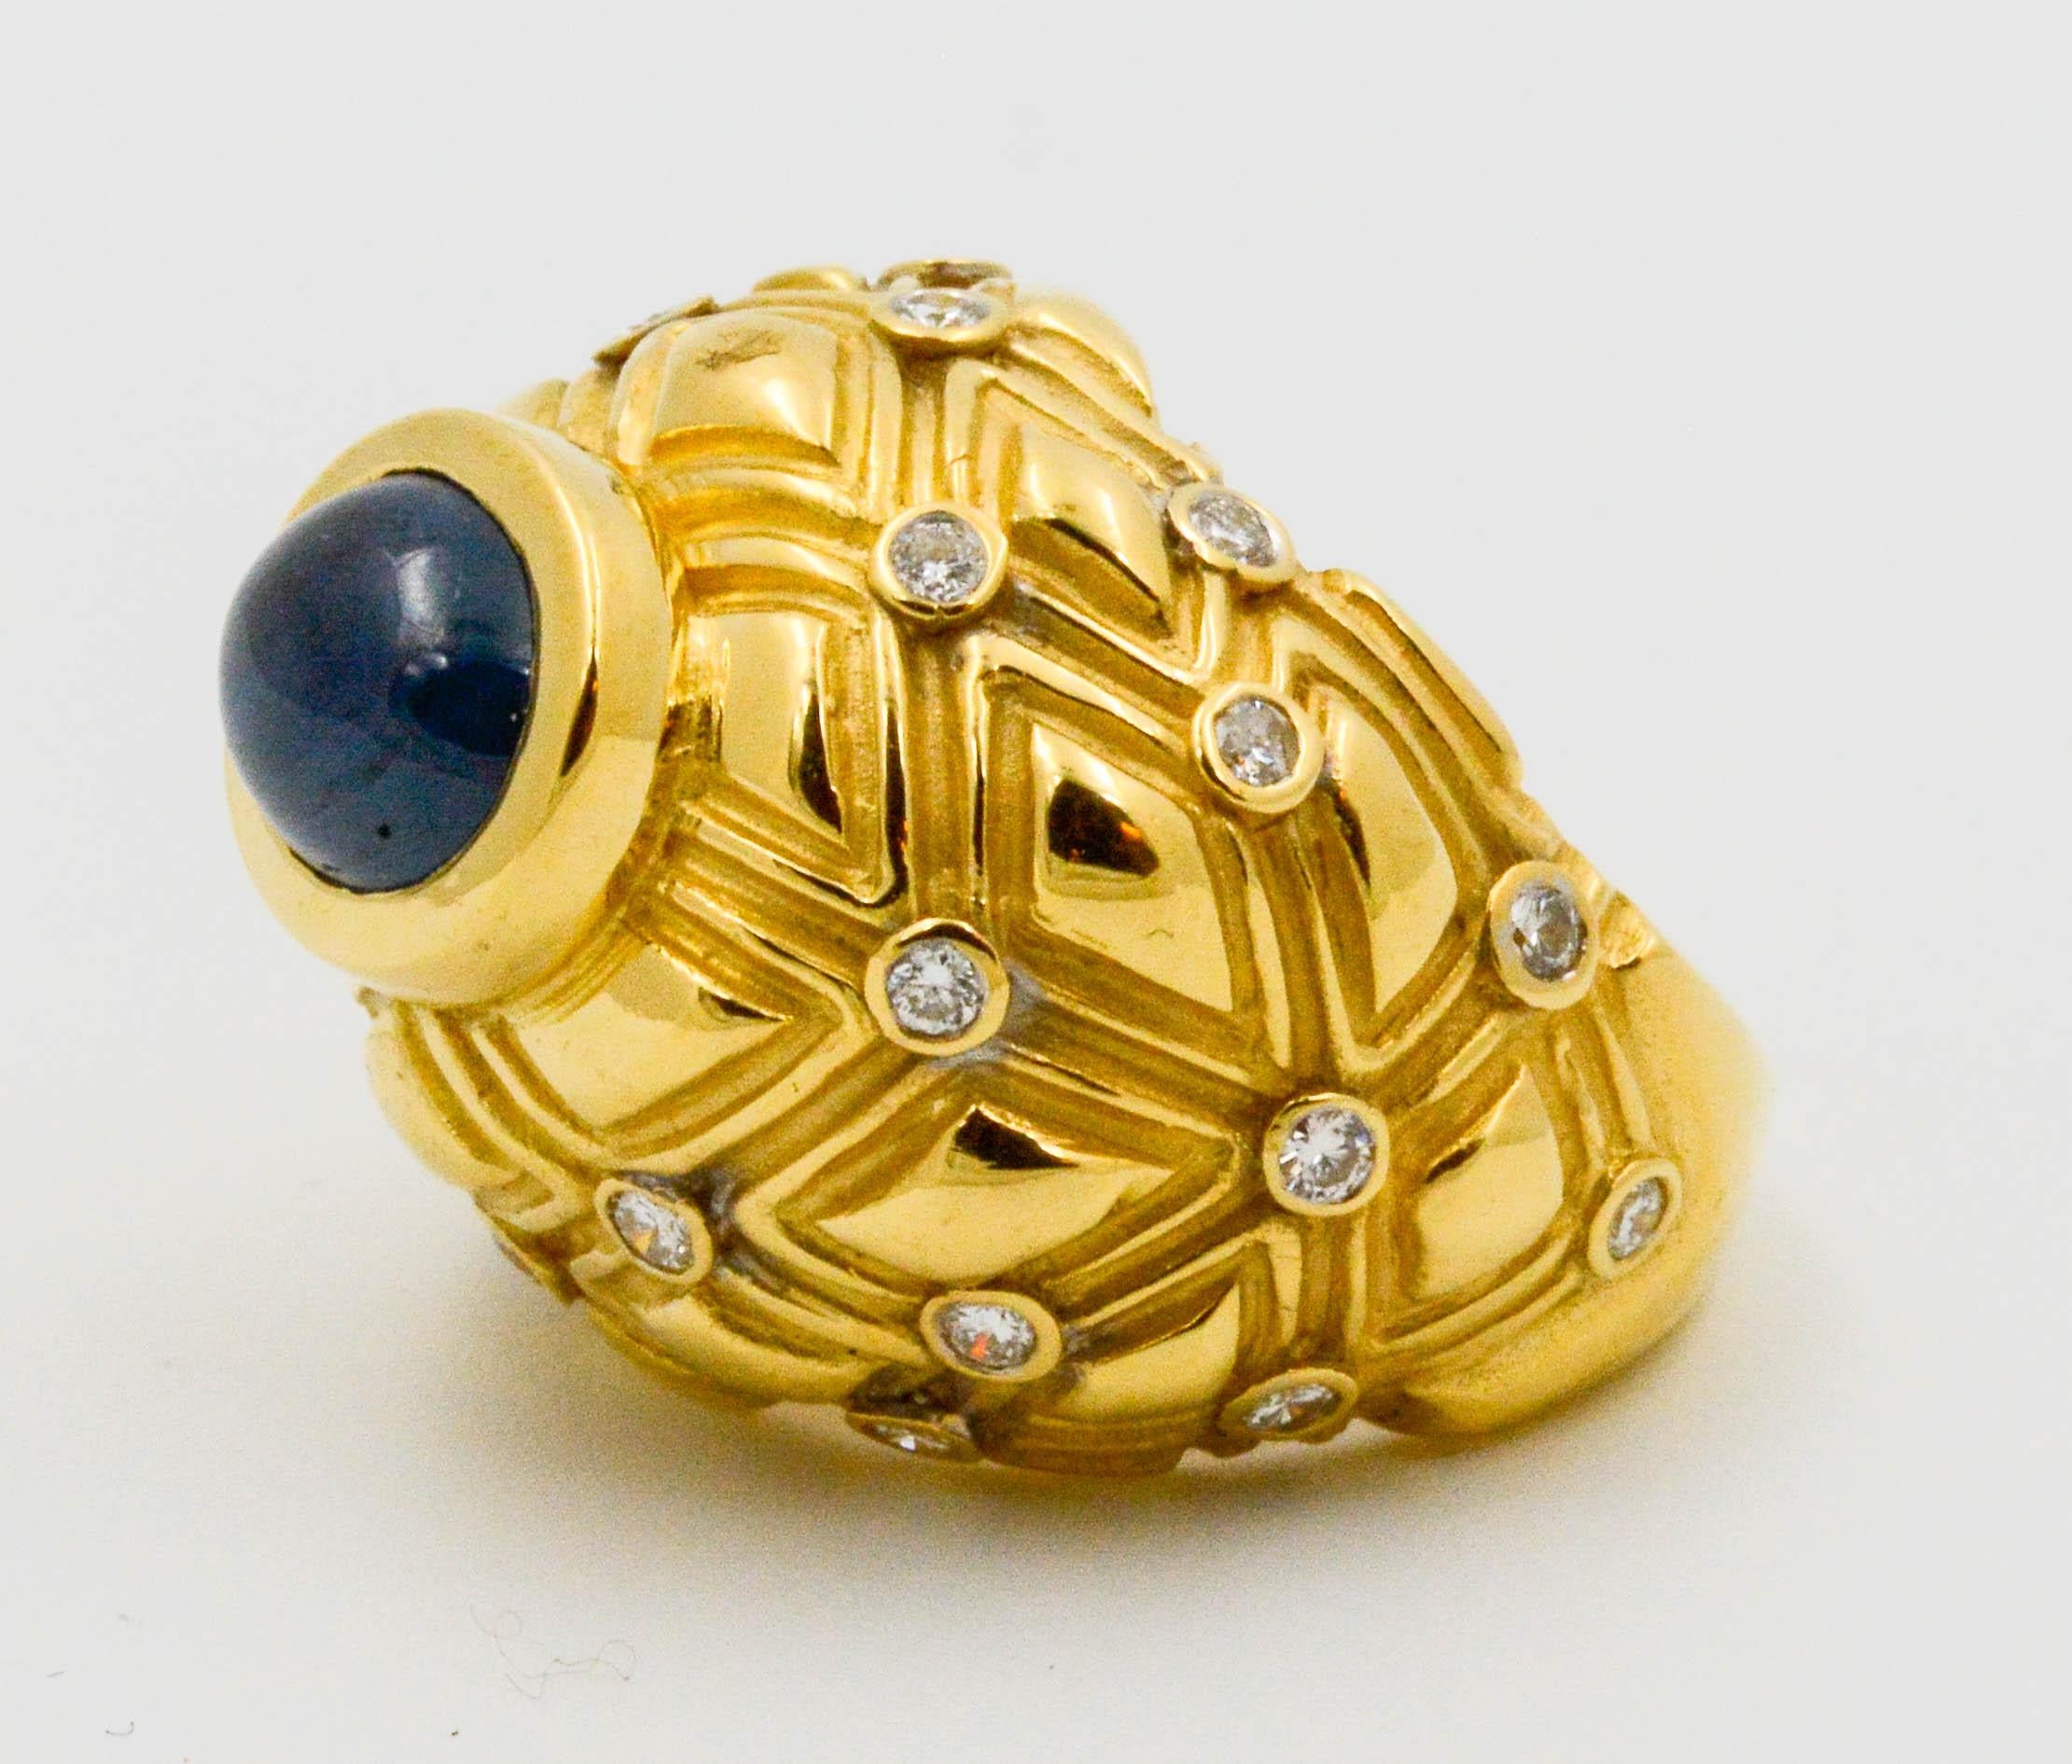 An exquisite 18 karat yellow Circa 1980's basketweave ring set with a 4 carat cabochon cut blue Sapphire and accented with  24 round brilliant cut .75 carats diamonds (G-H color, VS internal clarity). Ring is currently a finger size 5.